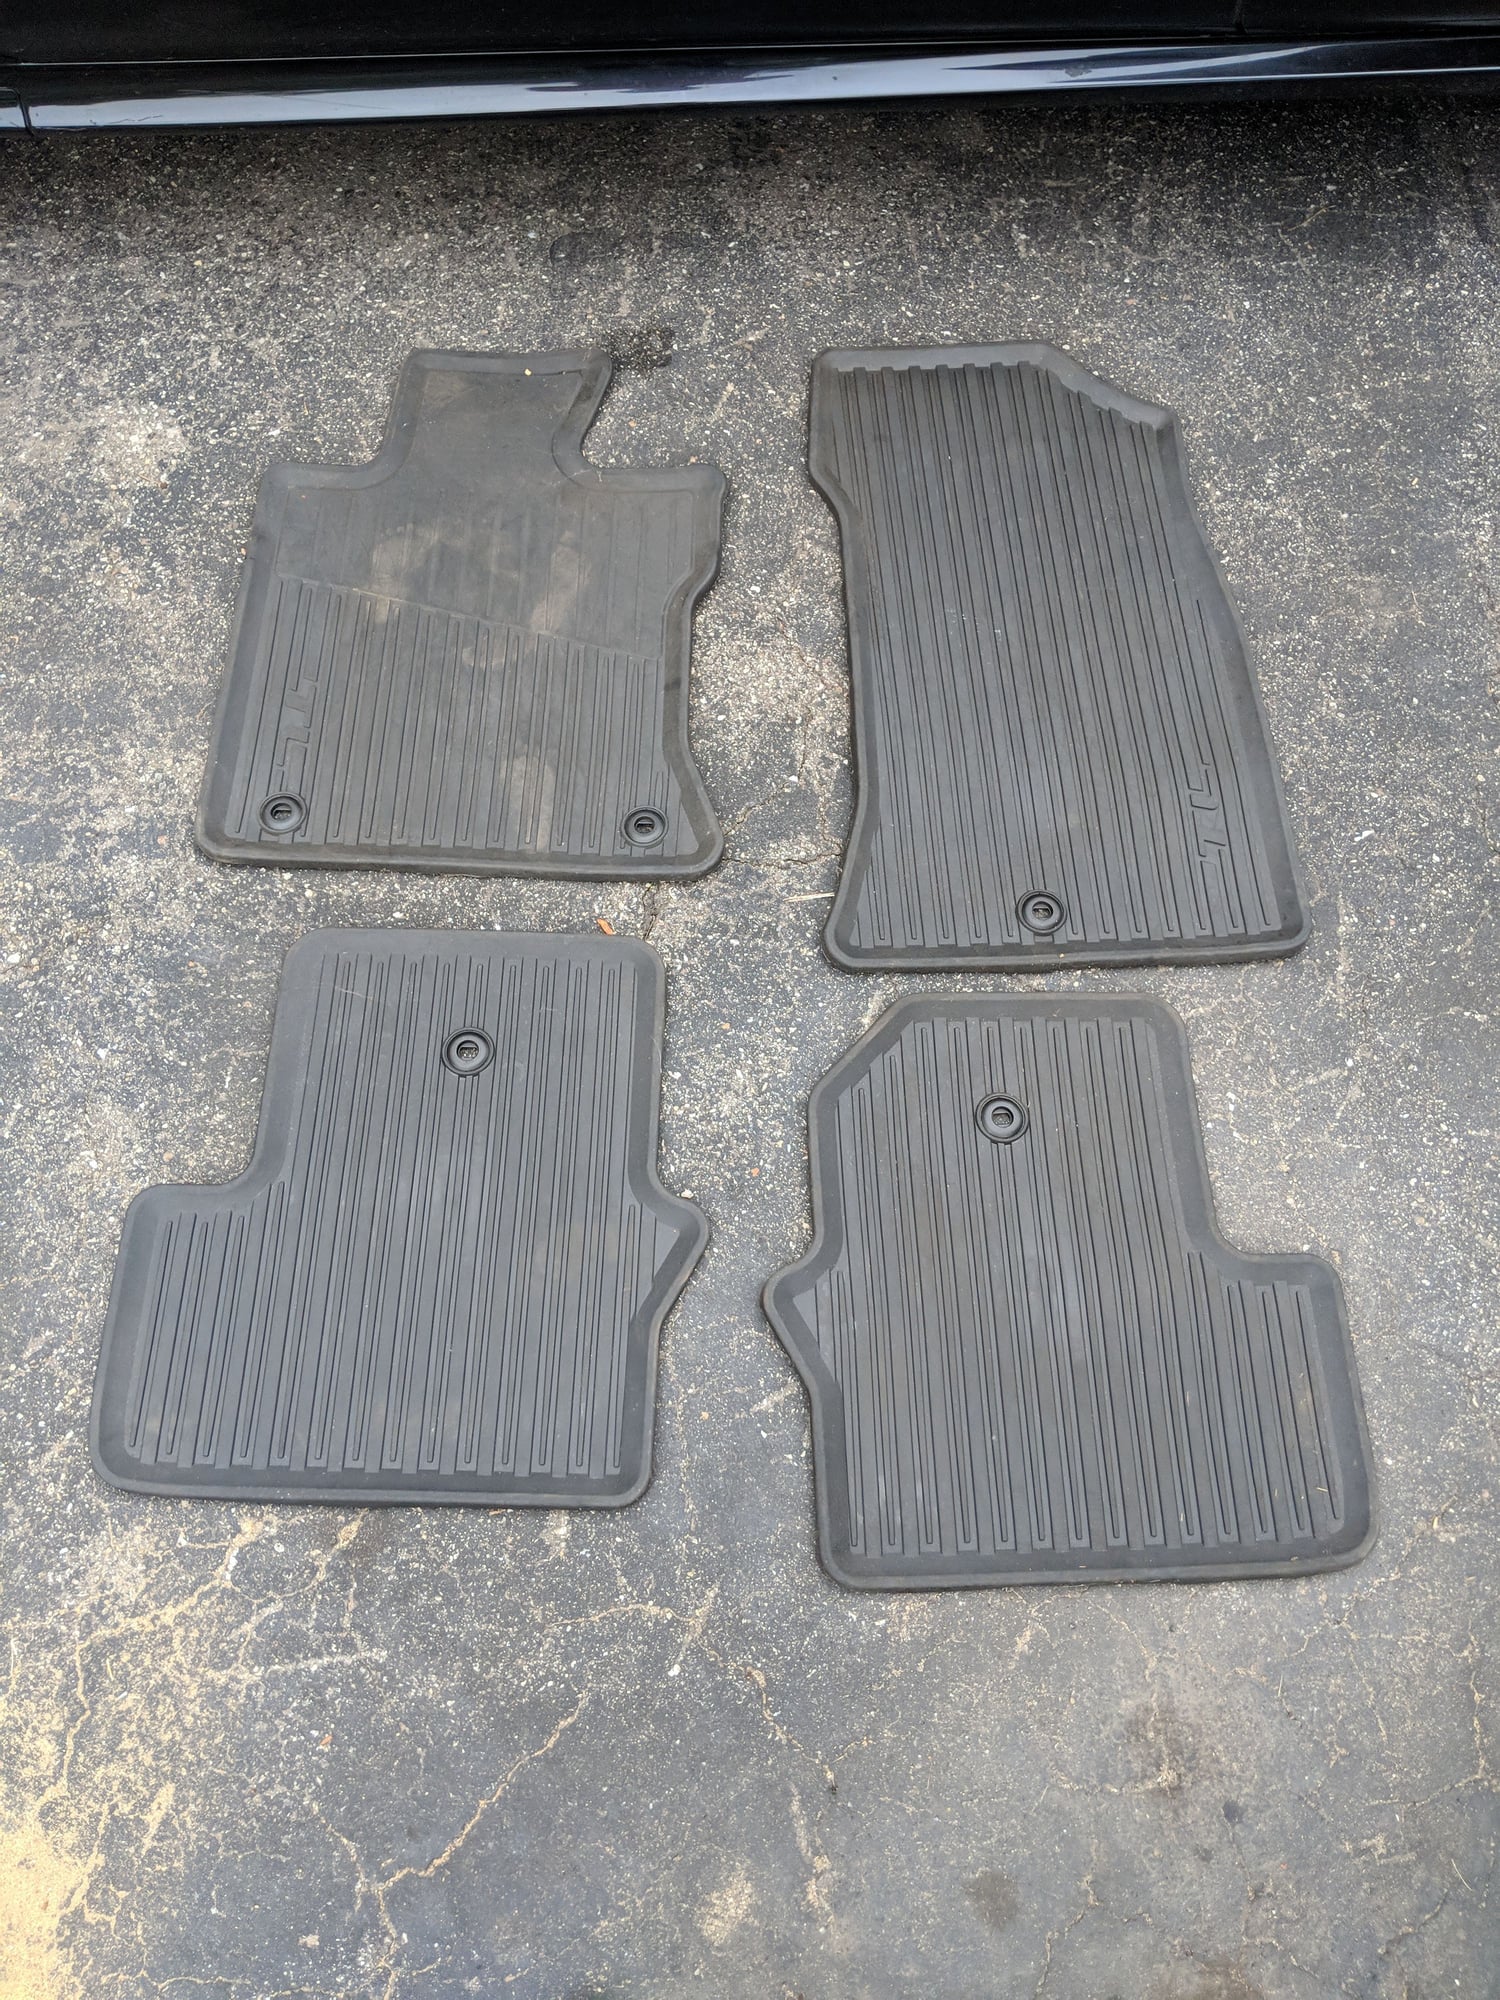 Interior/Upholstery - EXPIRED: 4G TL OEM All Weather Mats - Used - 2009 to 2011 Acura TL - Concord, NH 03301, United States